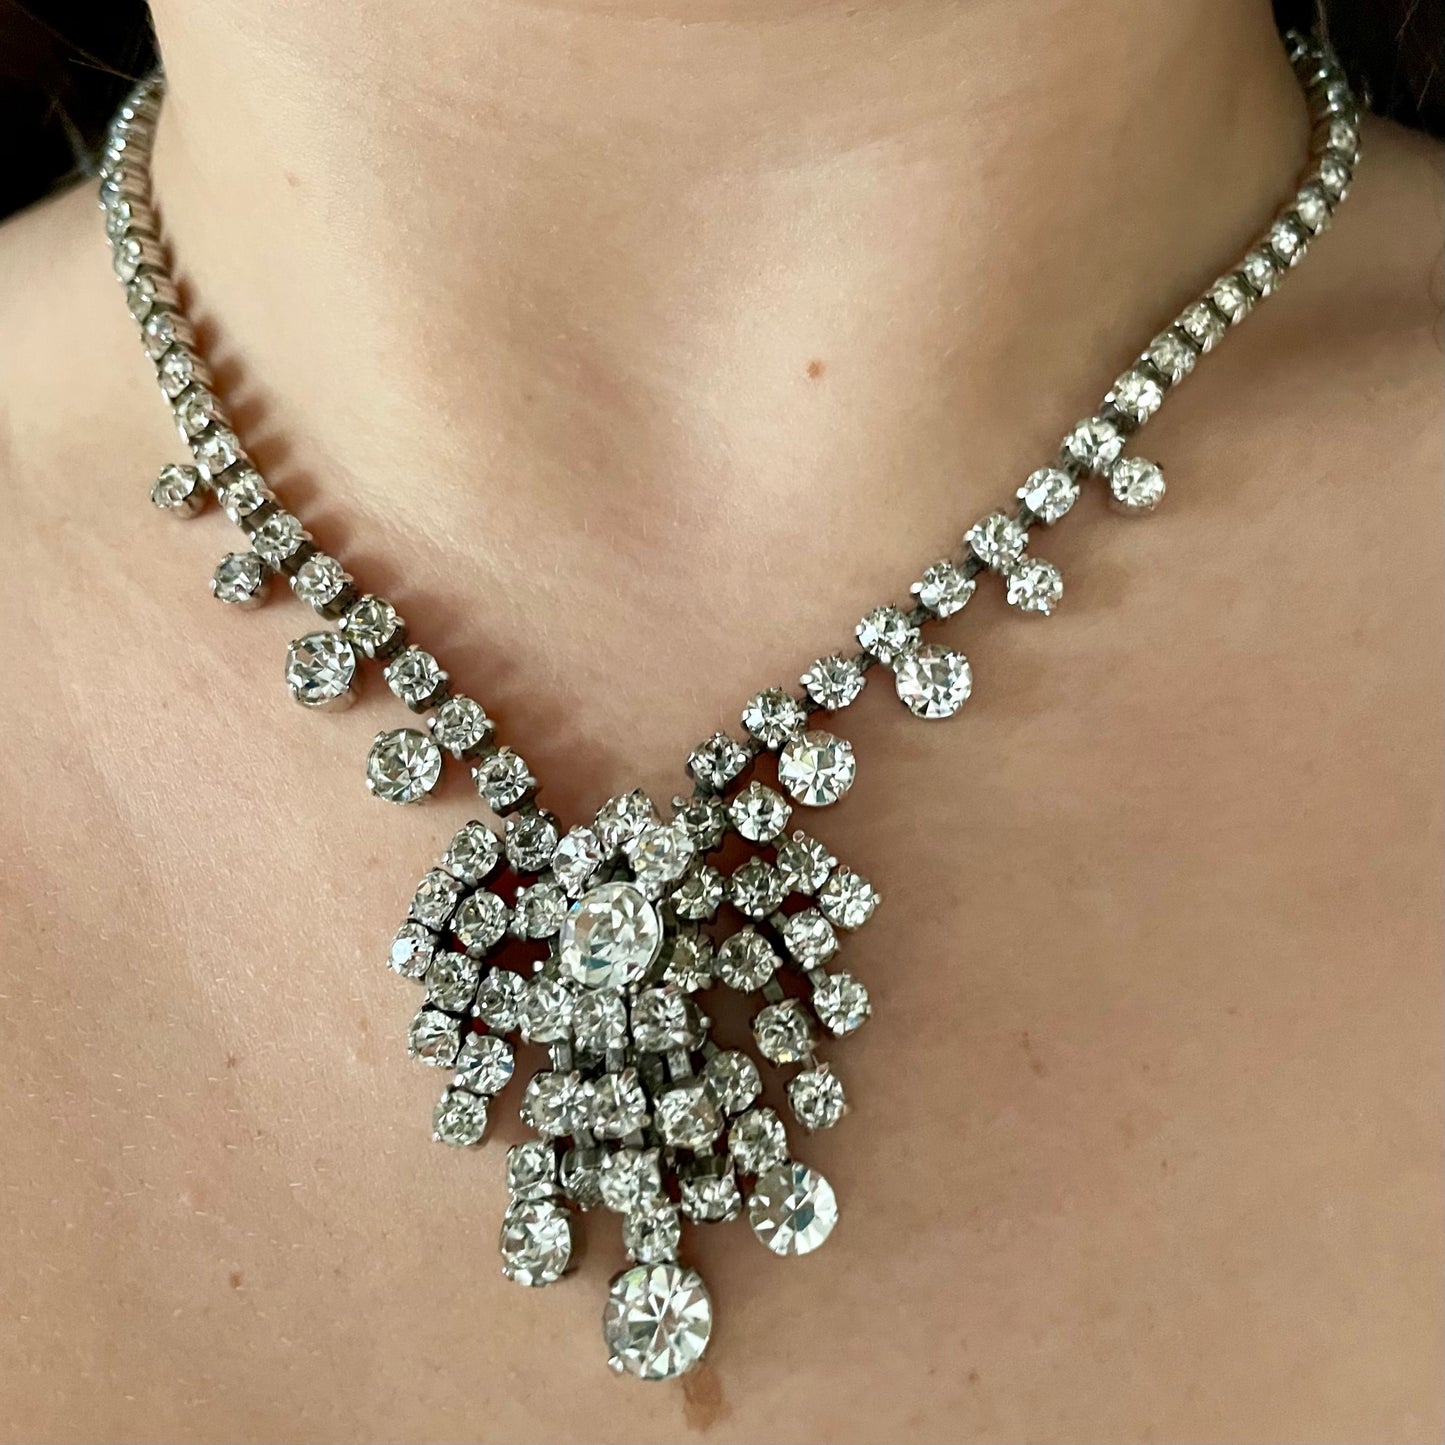 Sparkly 1950s Silver Toned Statement Necklace